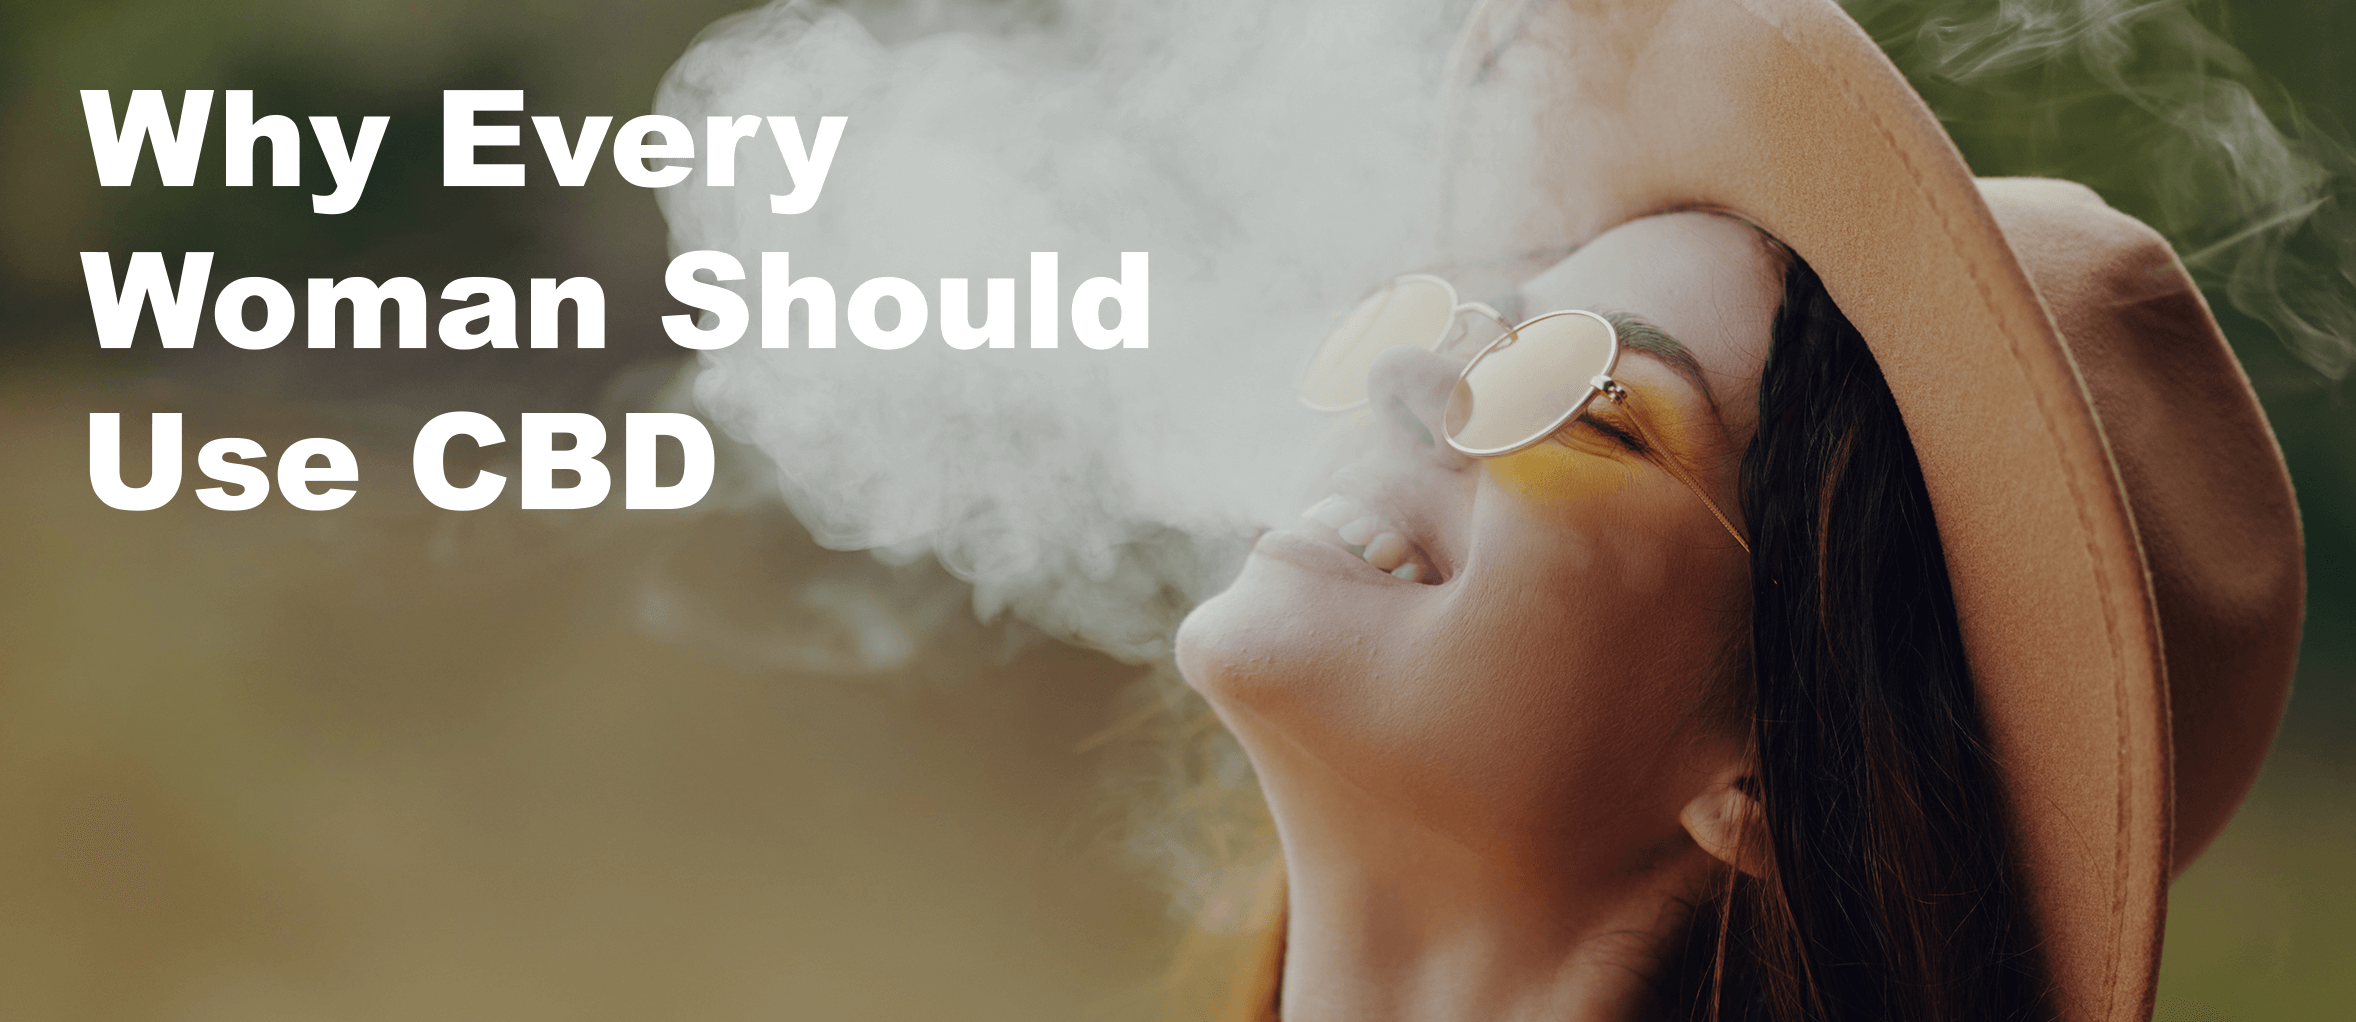 Why Every Woman Should Use CBD